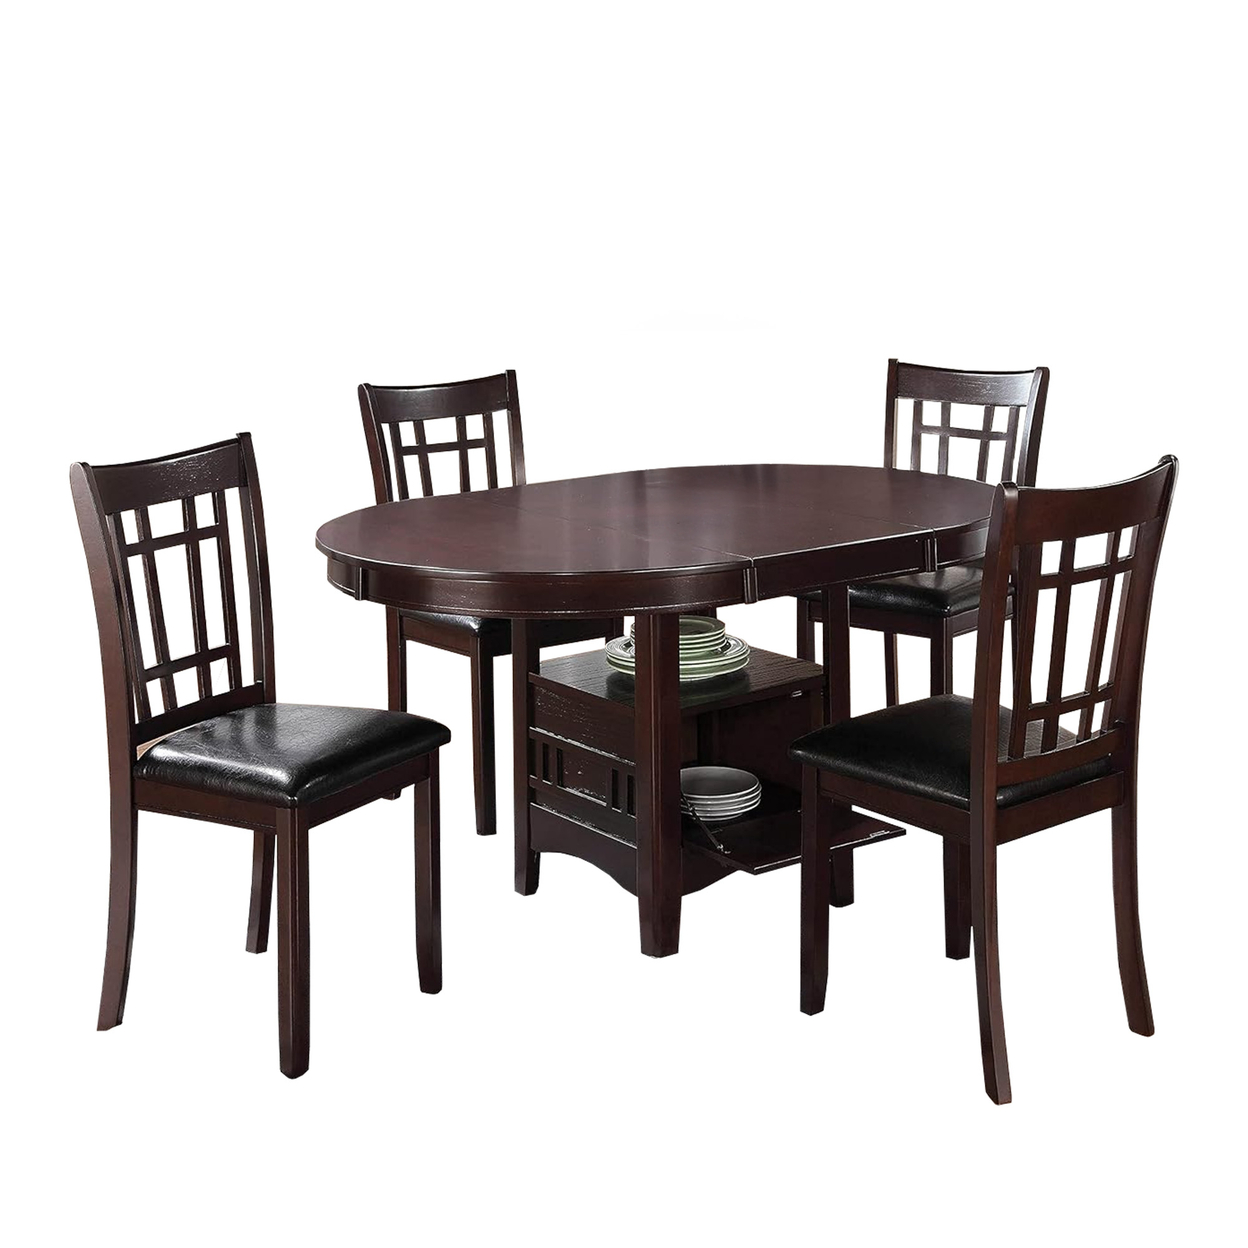 5 Piece Dining Set, 42 Inch Round Extendable Table With 4 Chairs, Espresso -Saltoro Sherpi